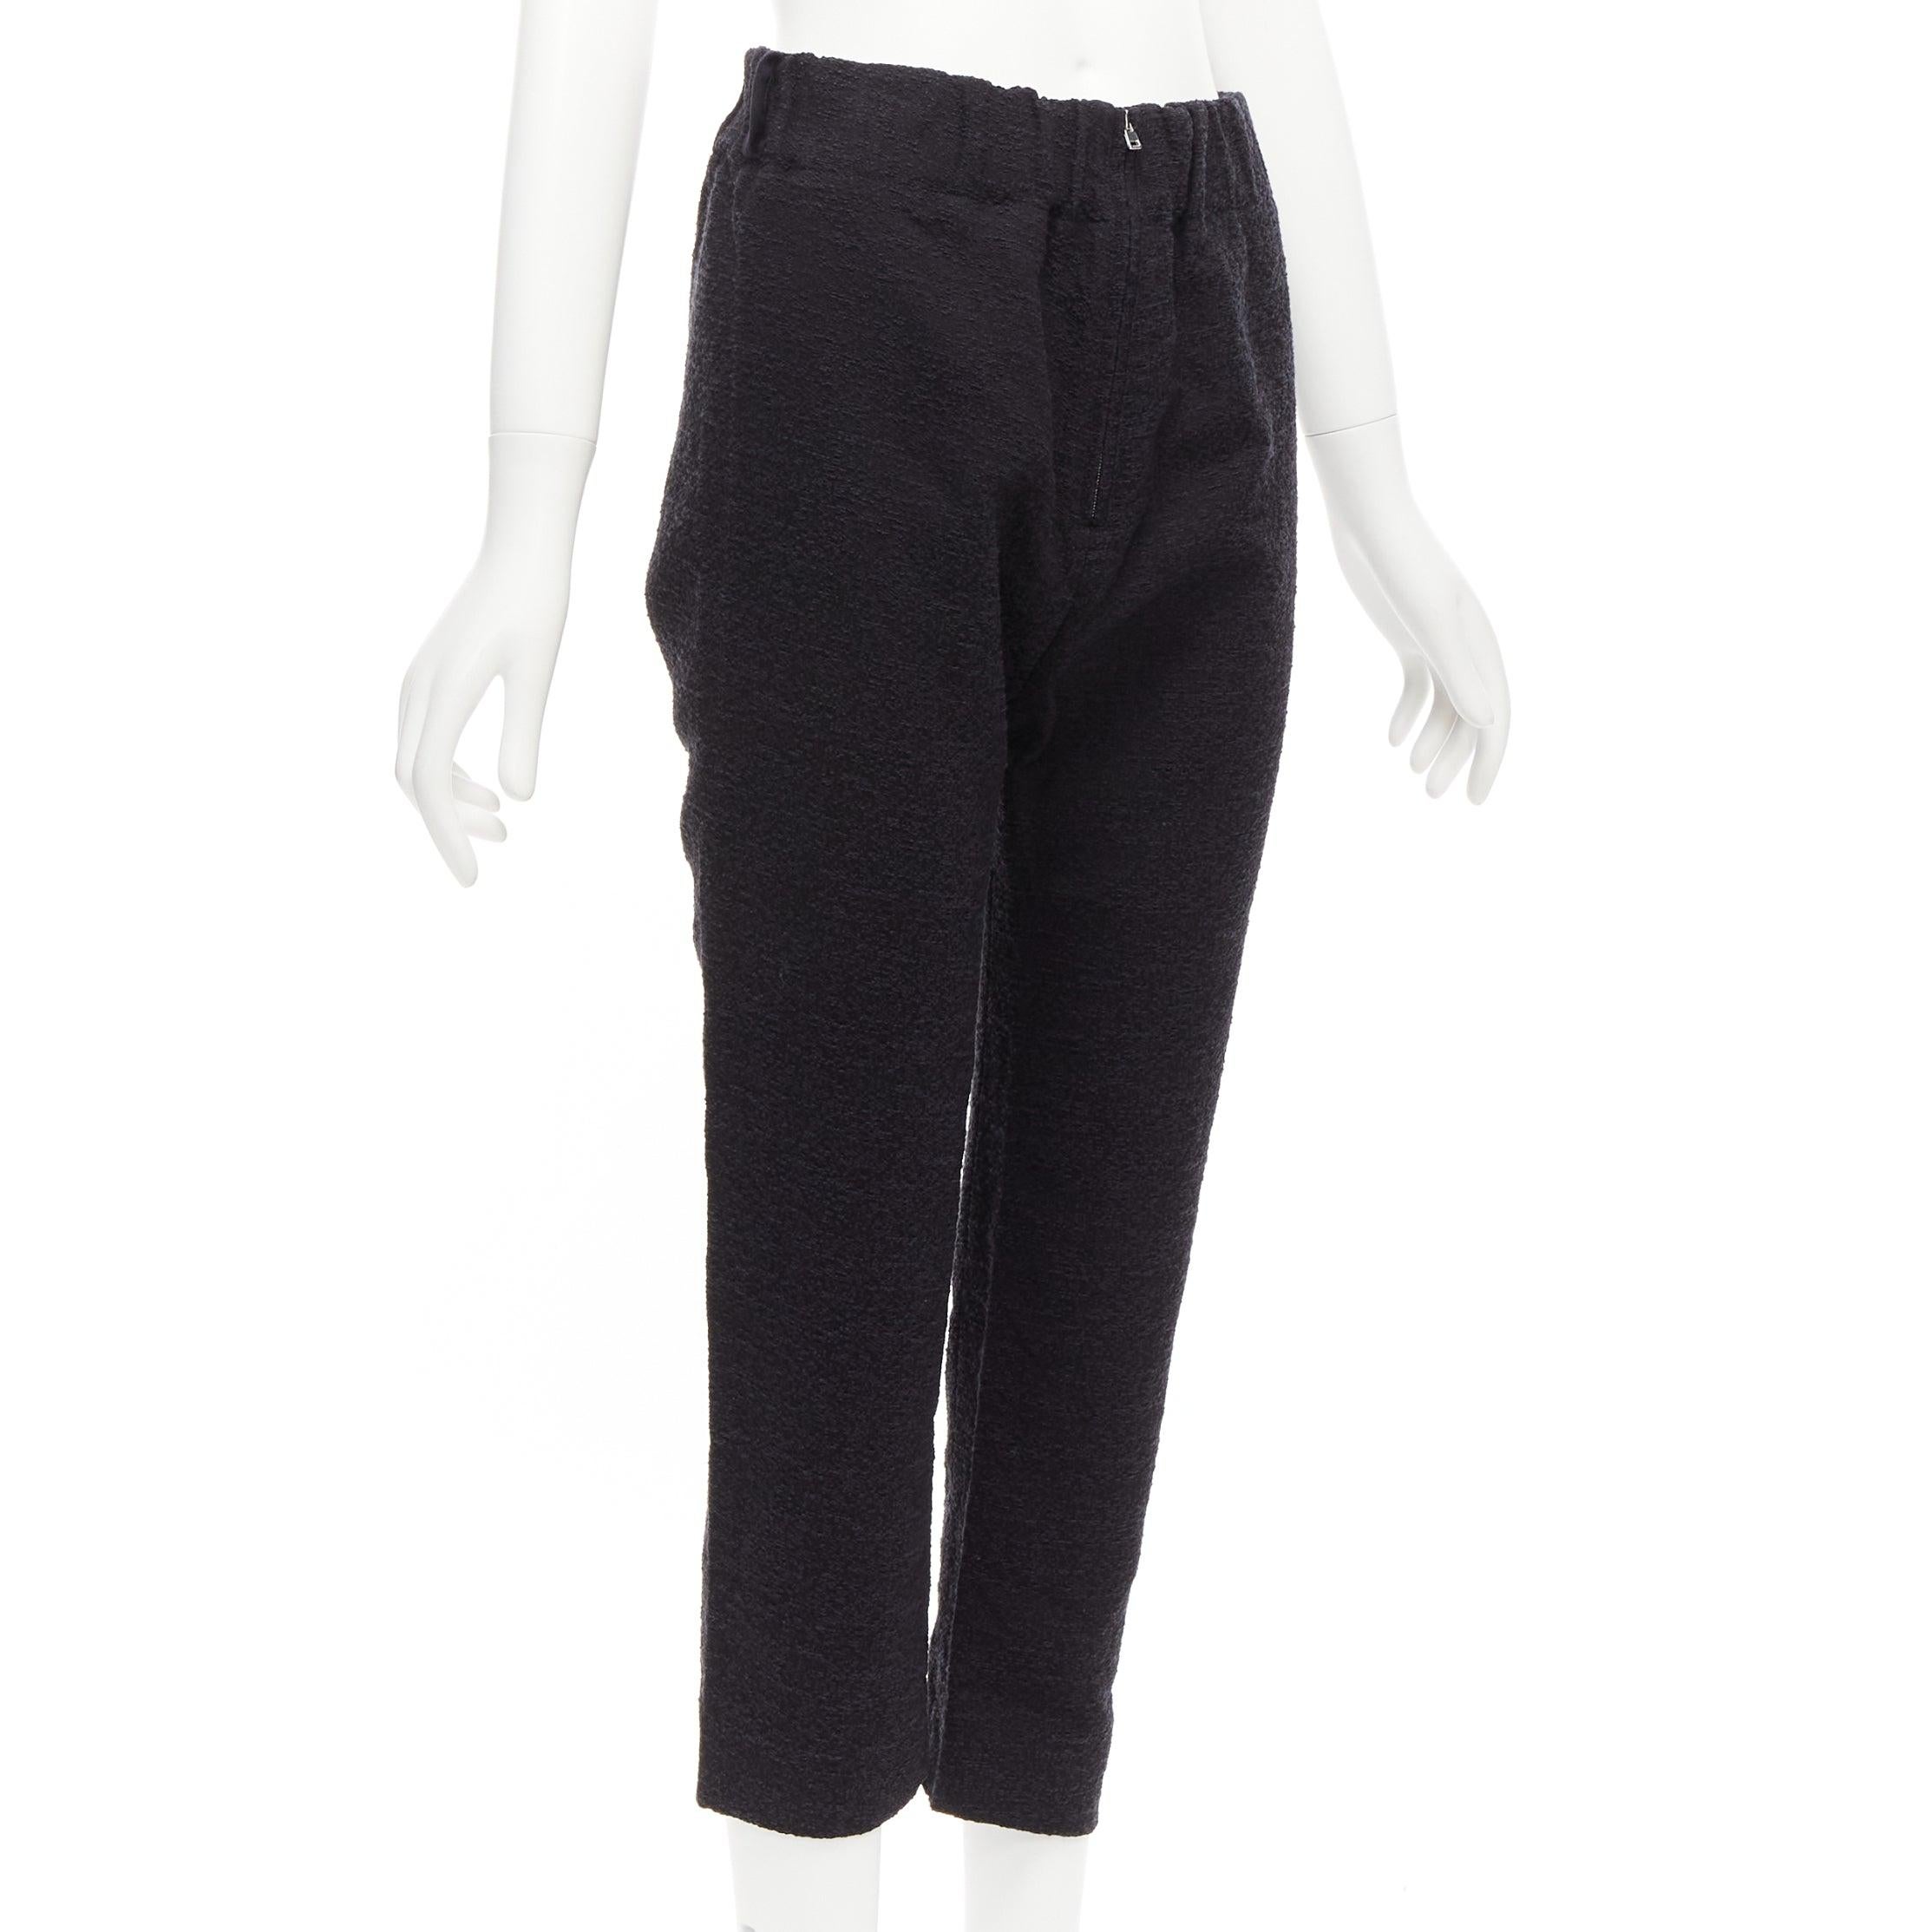 MARNI 2014 black cotton blend jacquard zip front tapered pants IT38 XS
Reference: CELG/A00257
Brand: Marni
Collection: 2014
Material: Cotton, Blend
Color: Black
Pattern: Solid
Closure: Zip
Extra Details: Zip front.
Made in: